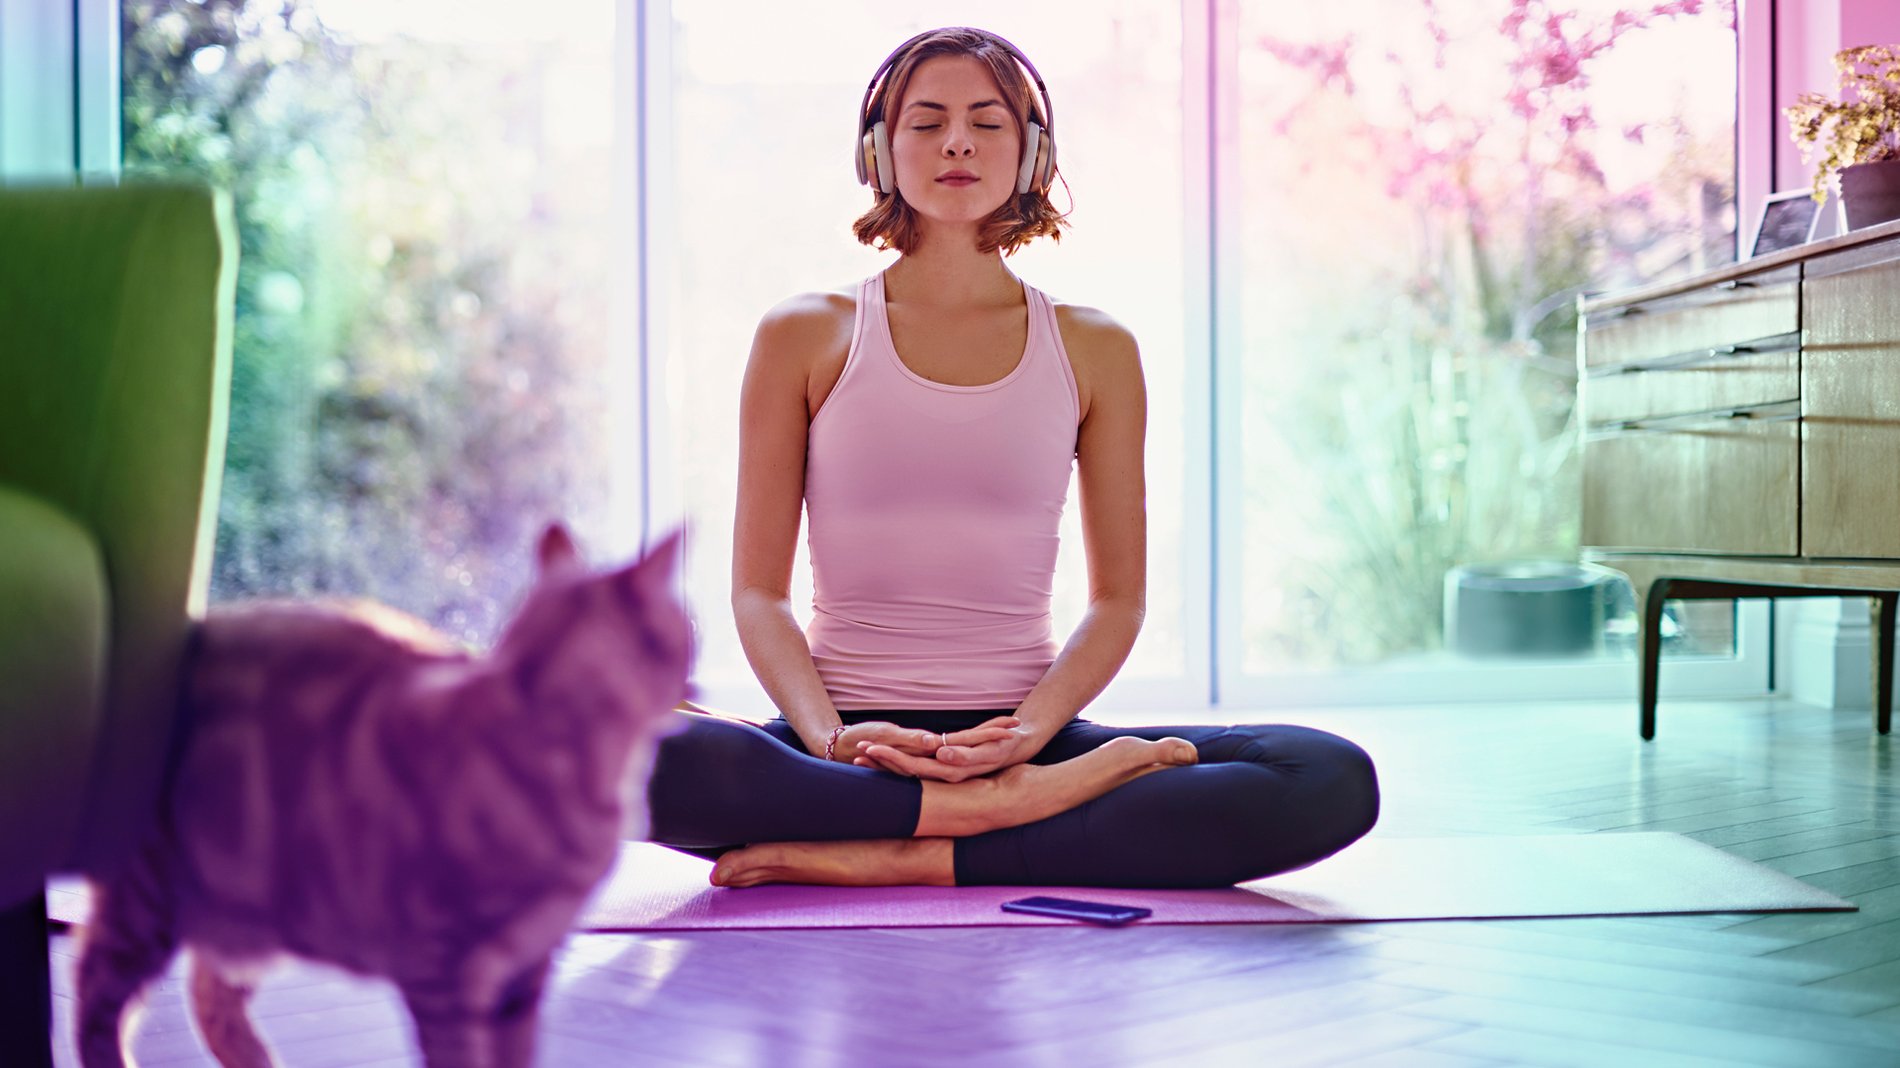 A woman sits on a yoga mat in a living room while wearing large headphones streaming meditation music through her Three Mobile Network on her cell phone that rests on the floor in front of her.